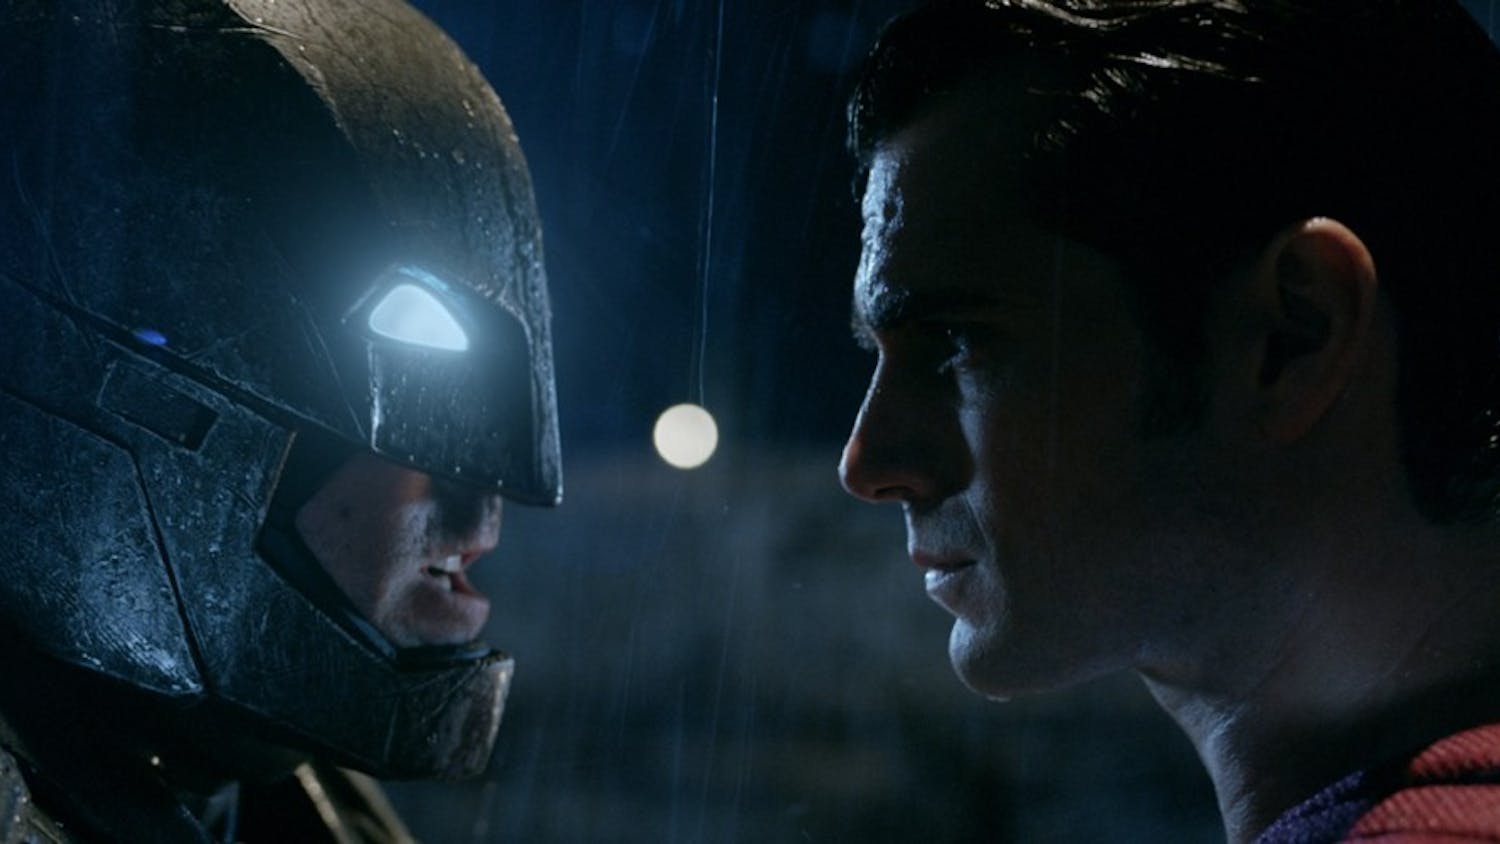 'Batman V Superman: Dawn of Justice' continues the dark undertones typical of Zack Snyder film, while telling a smart story.